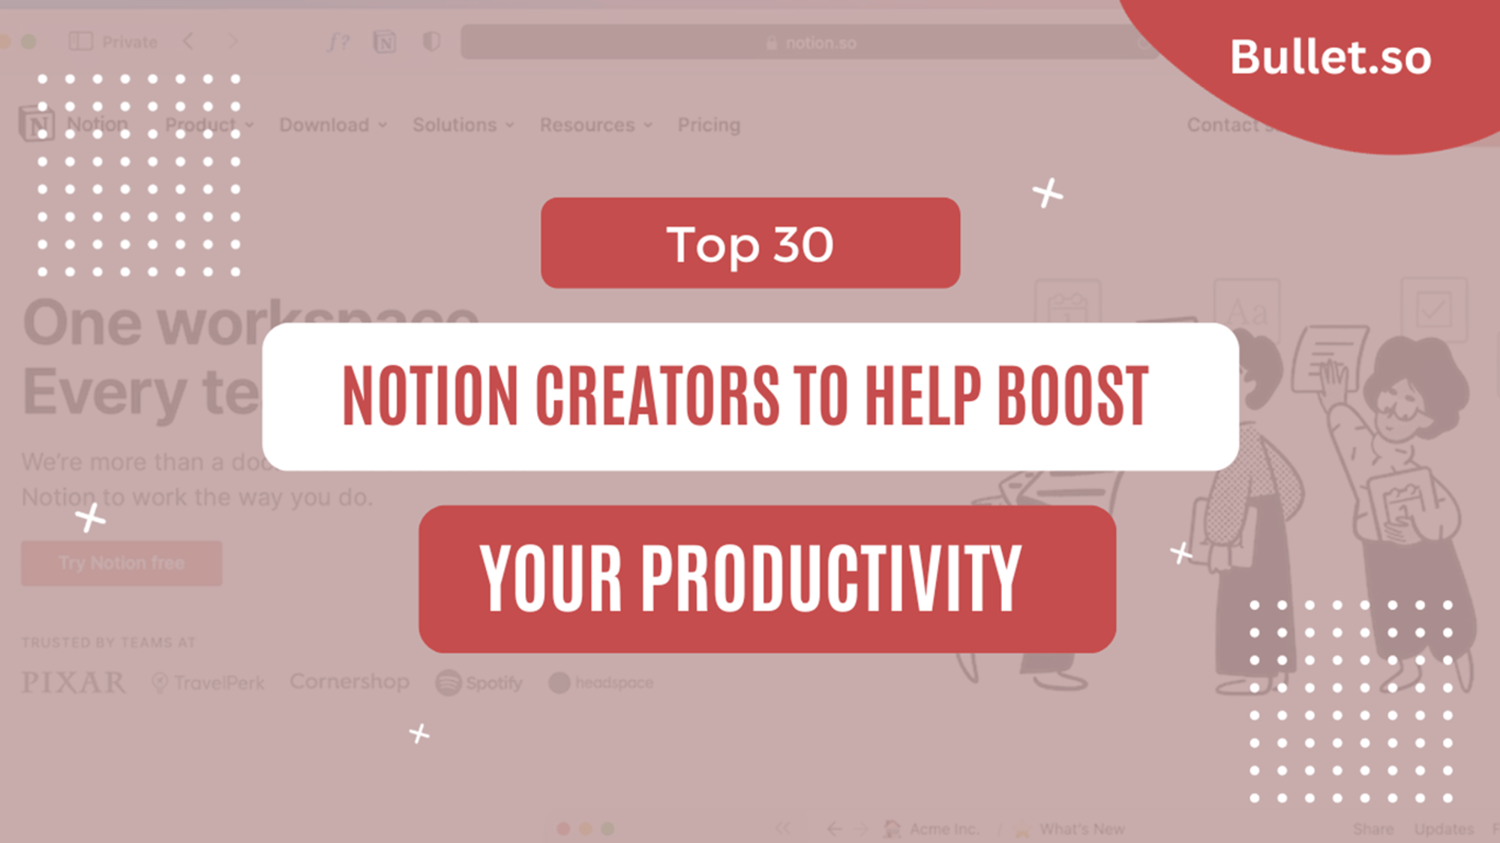 Top notion creators with their template to elevate your productivity! | Bullet.so